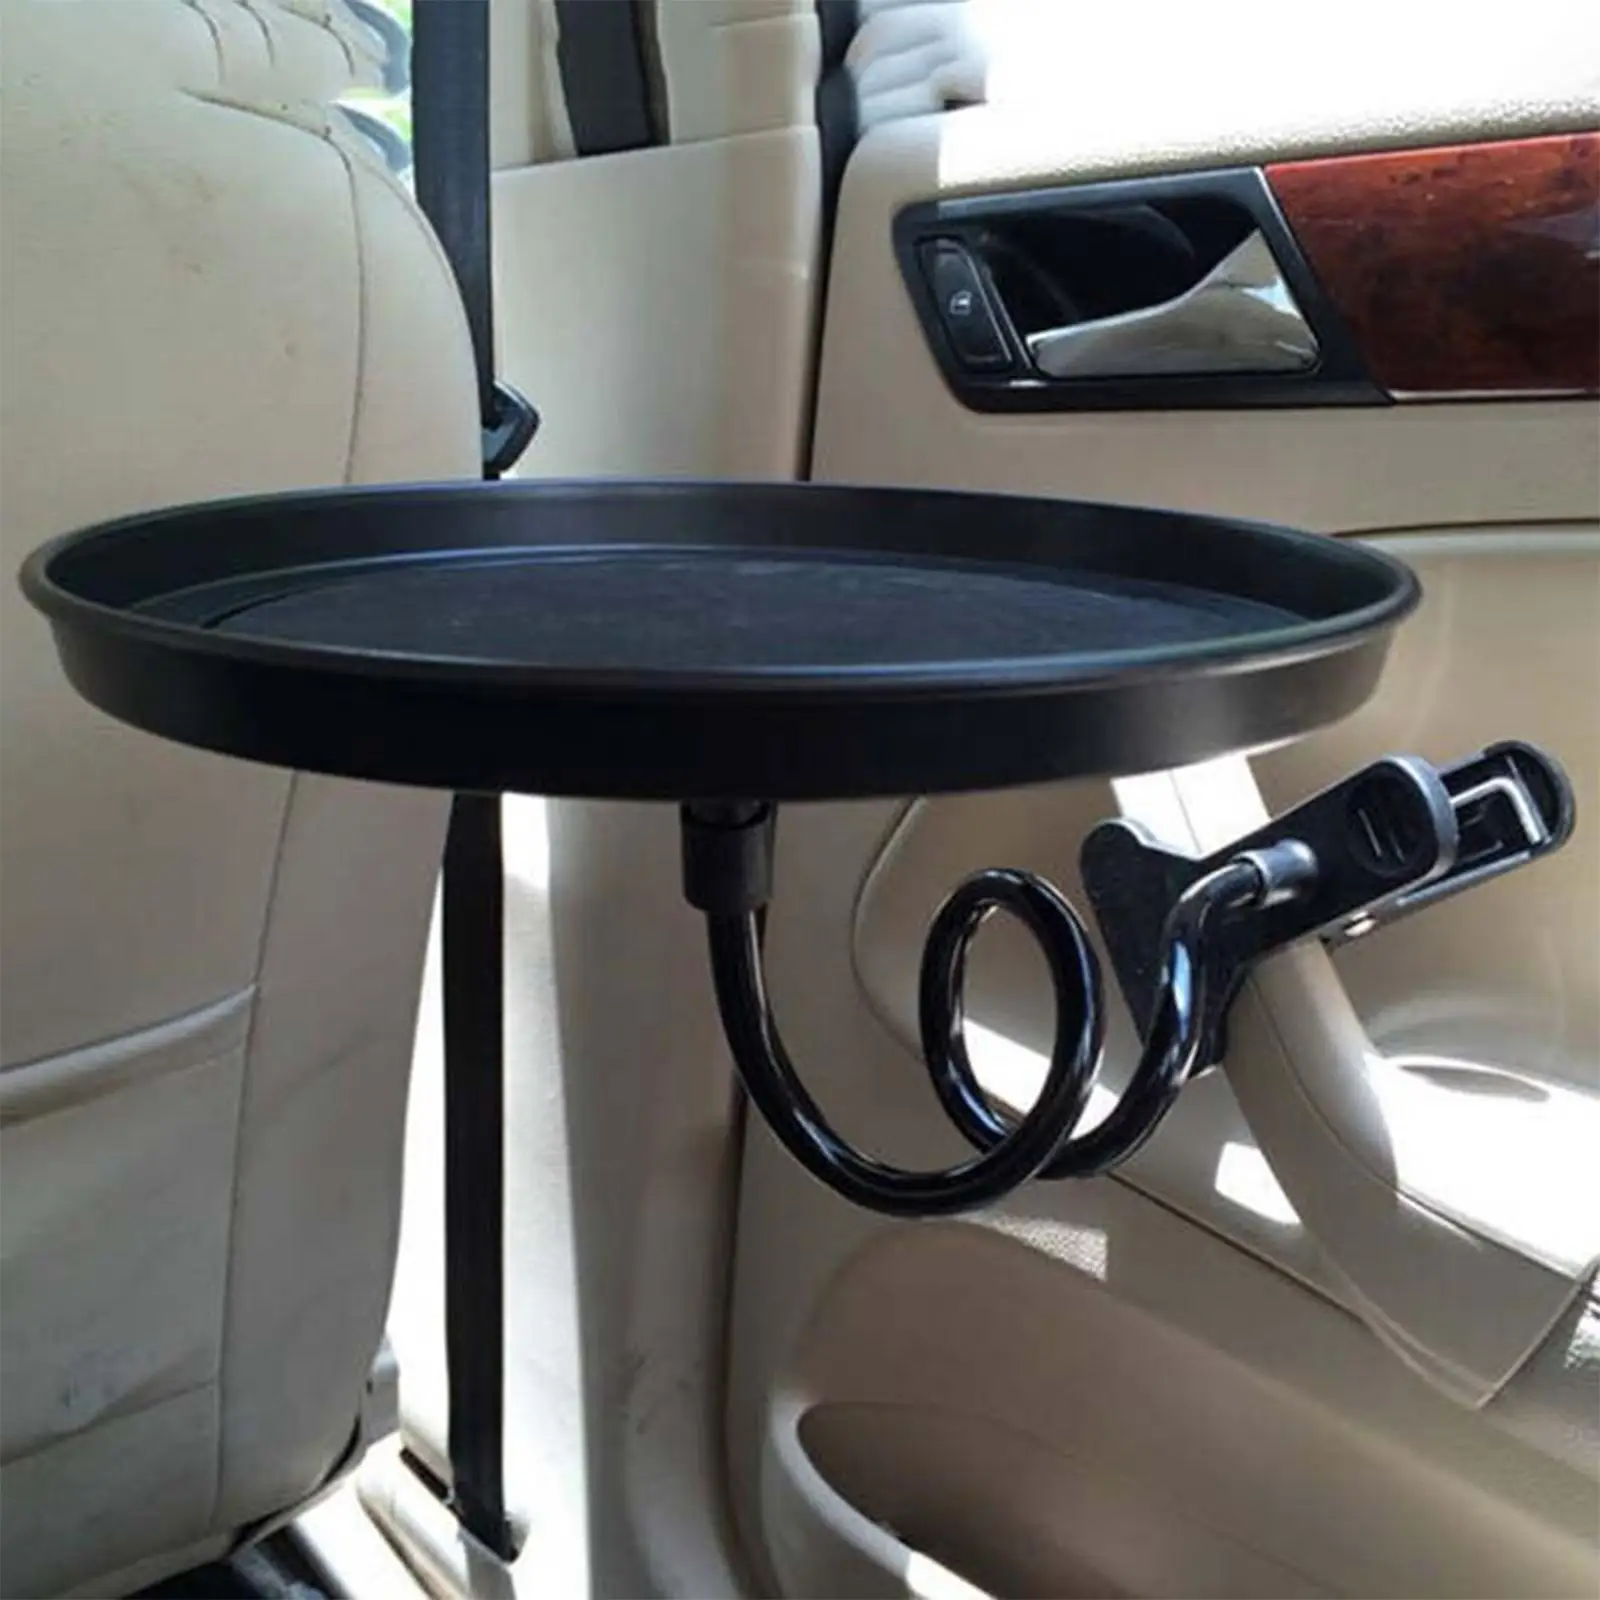 Car Food Tray Non-Skid Stand W/ Clamp for Passenger Seat Auto